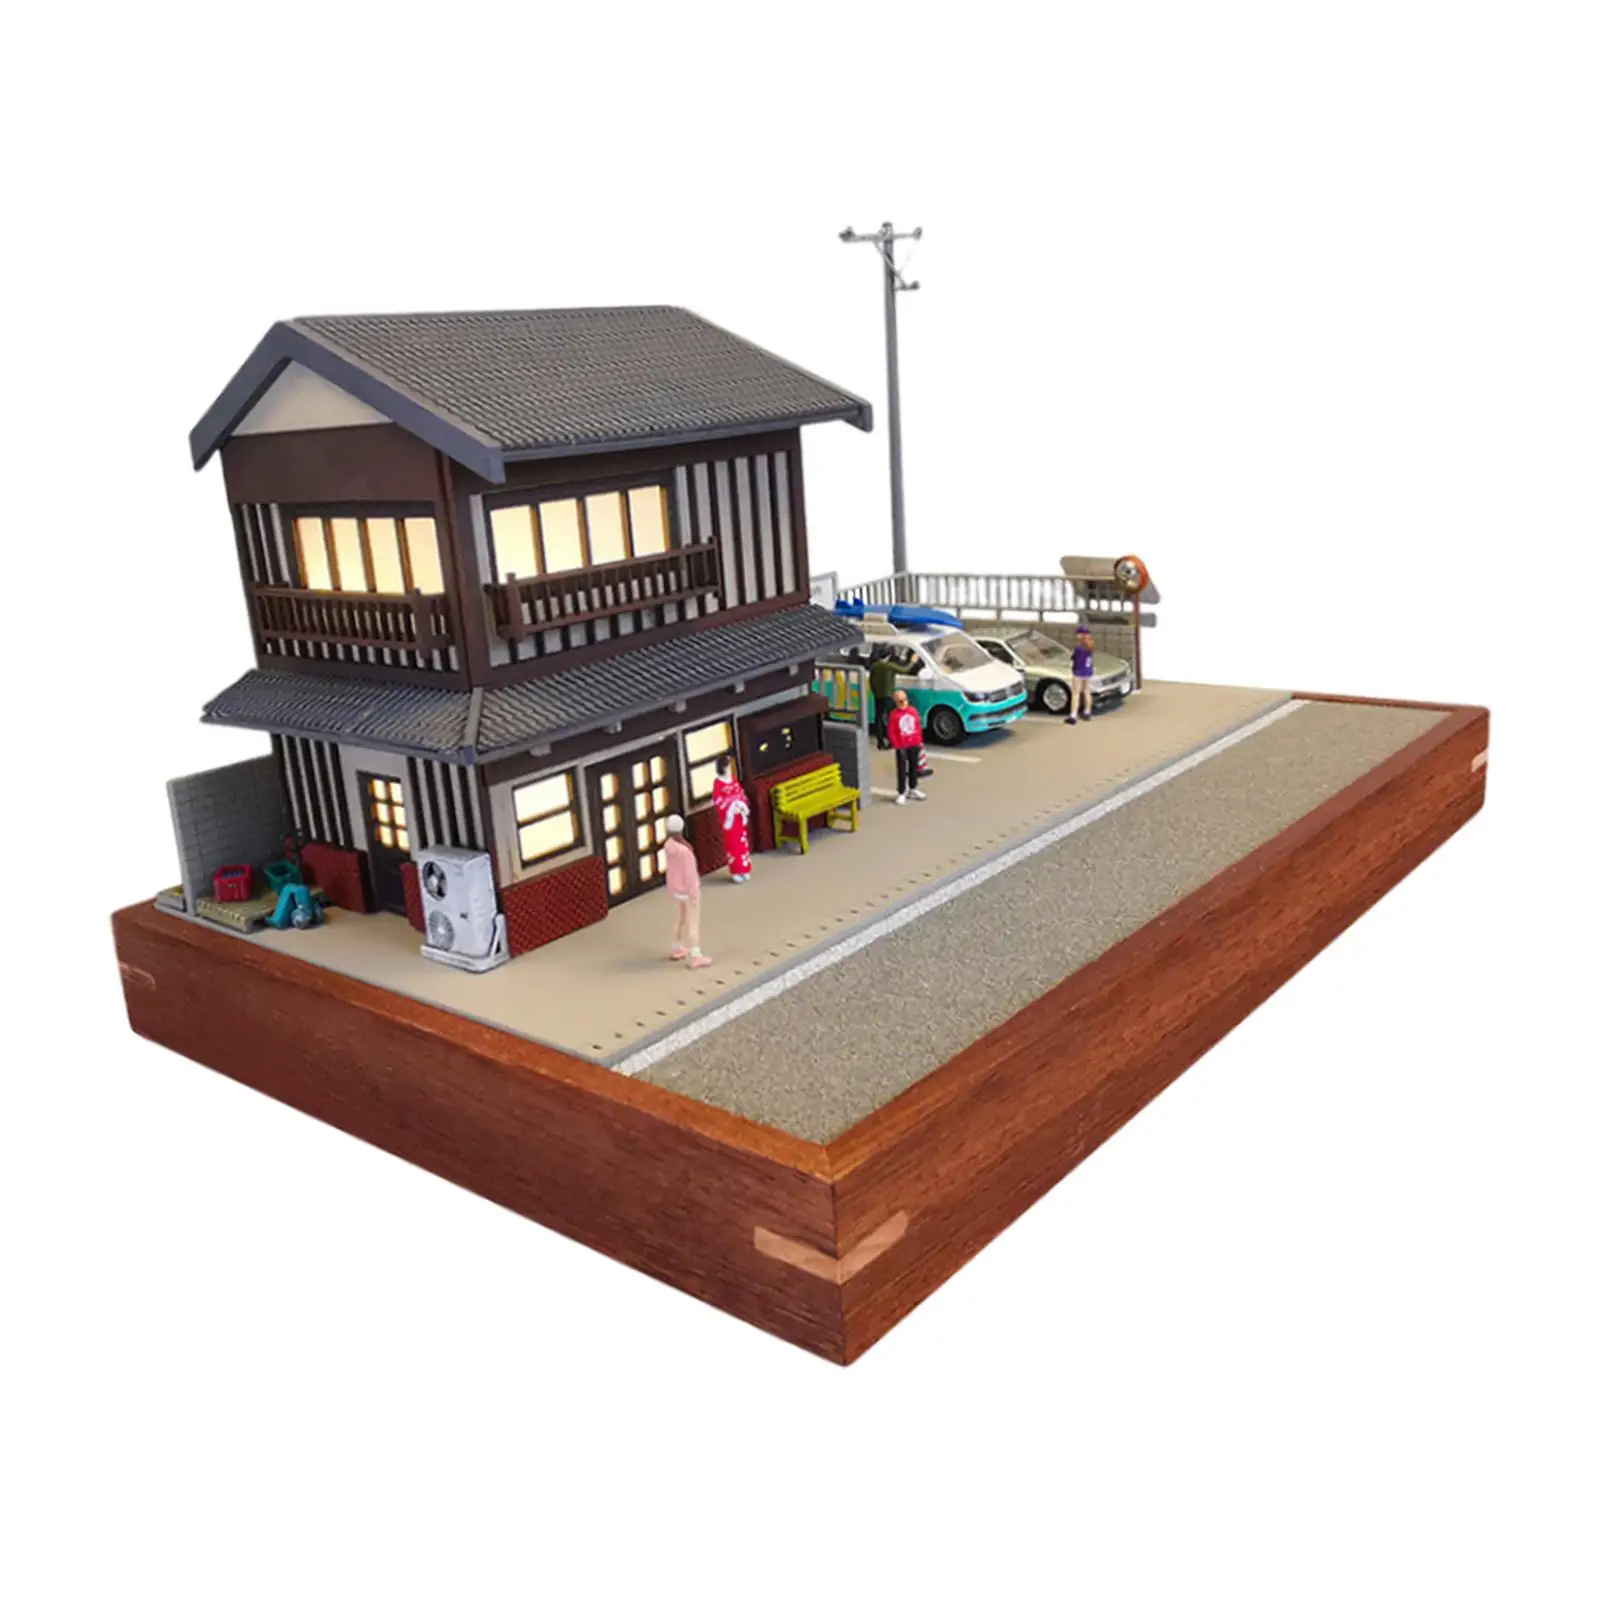 Building Display Scene Model for Train Railway Decor Diorama Layout DIY Projects Accessory Miniature Scene Layout Scenery Layout